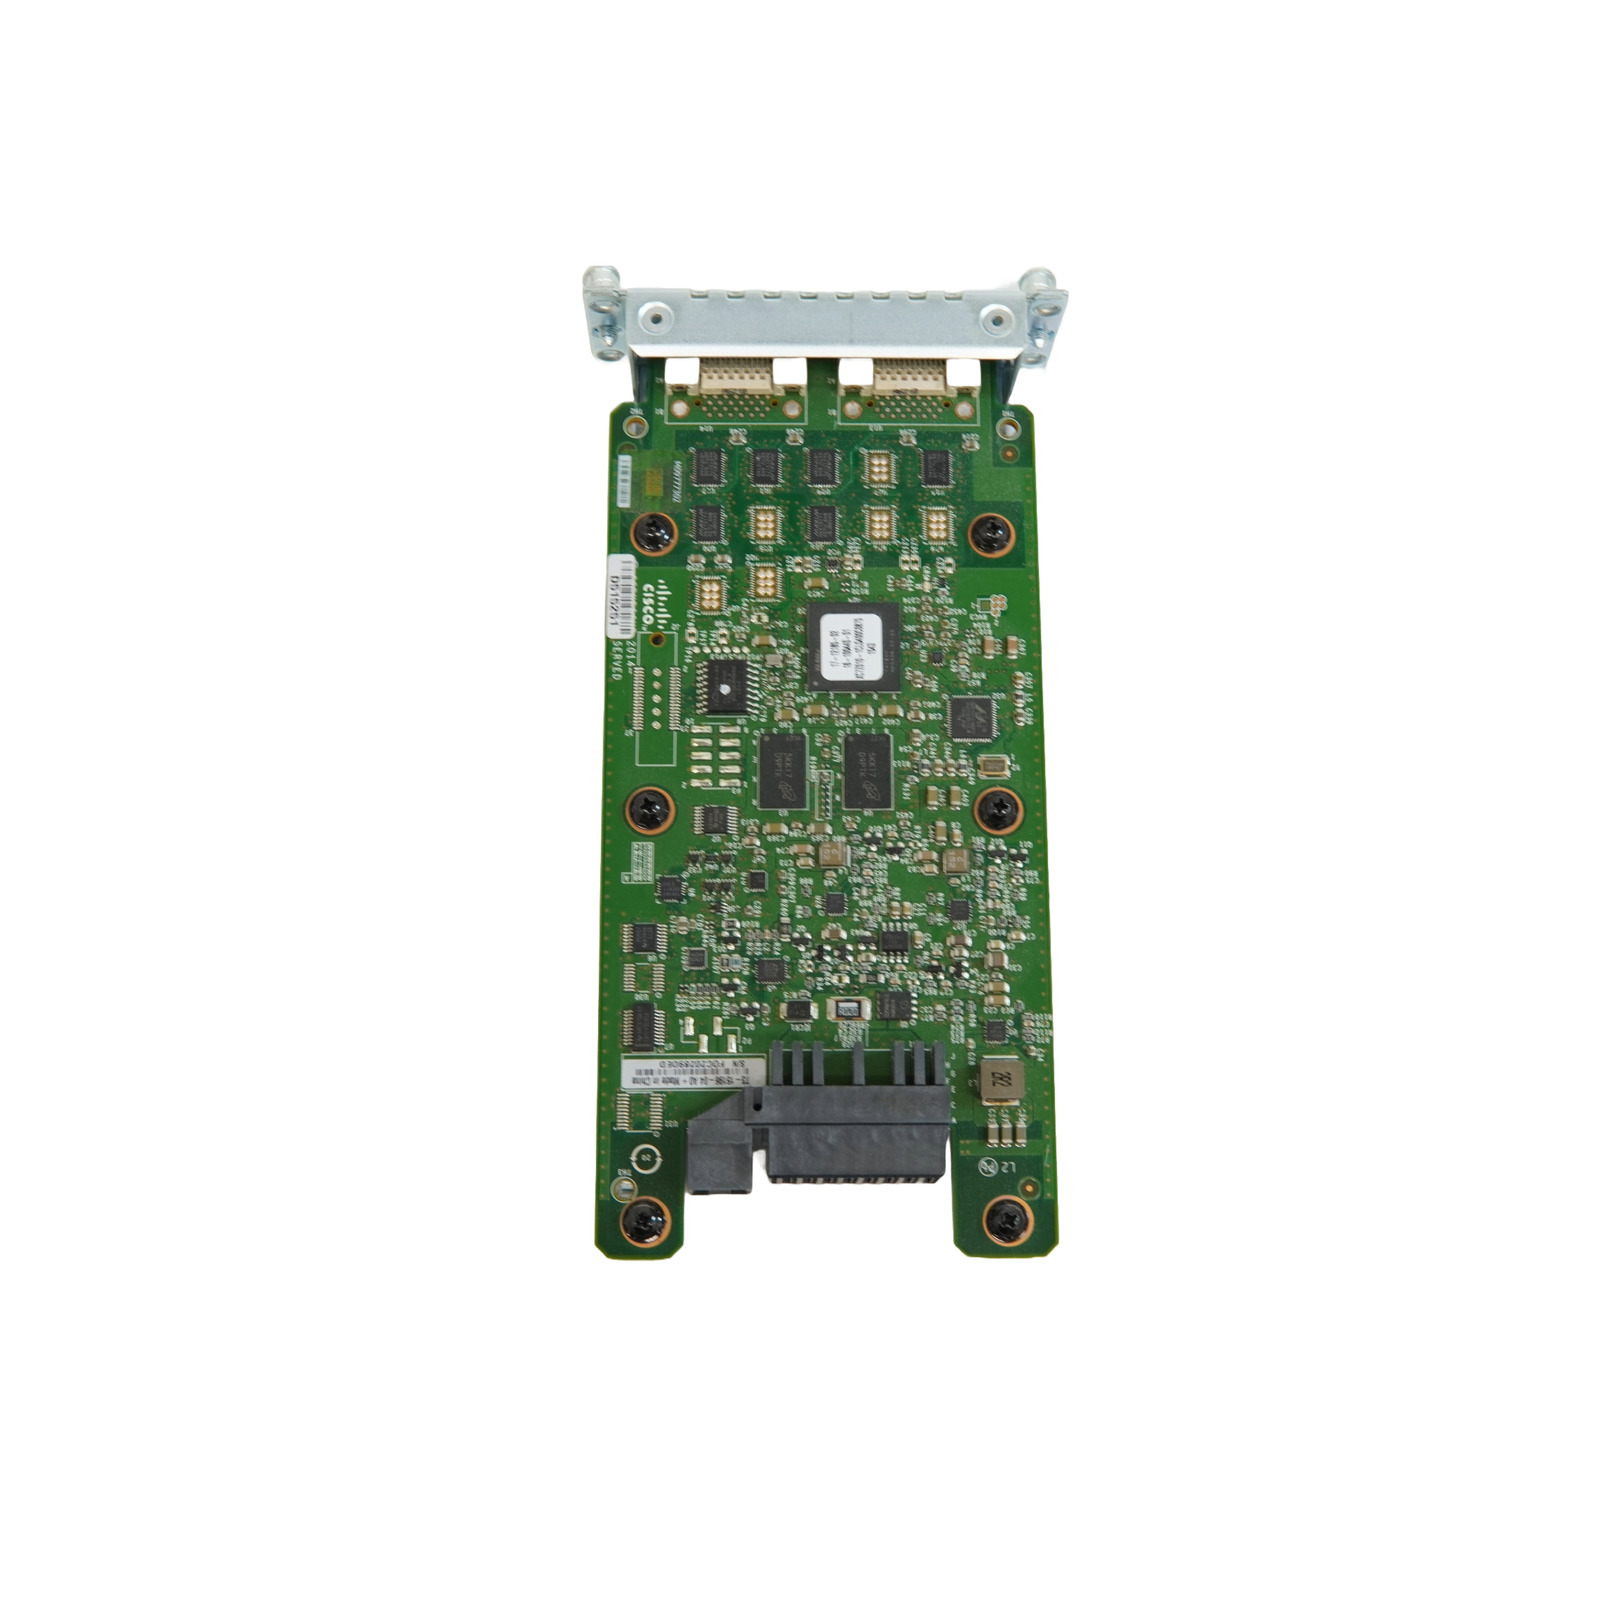 Cisco NIM-2T 2-Port Serial WAN Interface Card for ISR Series Routers